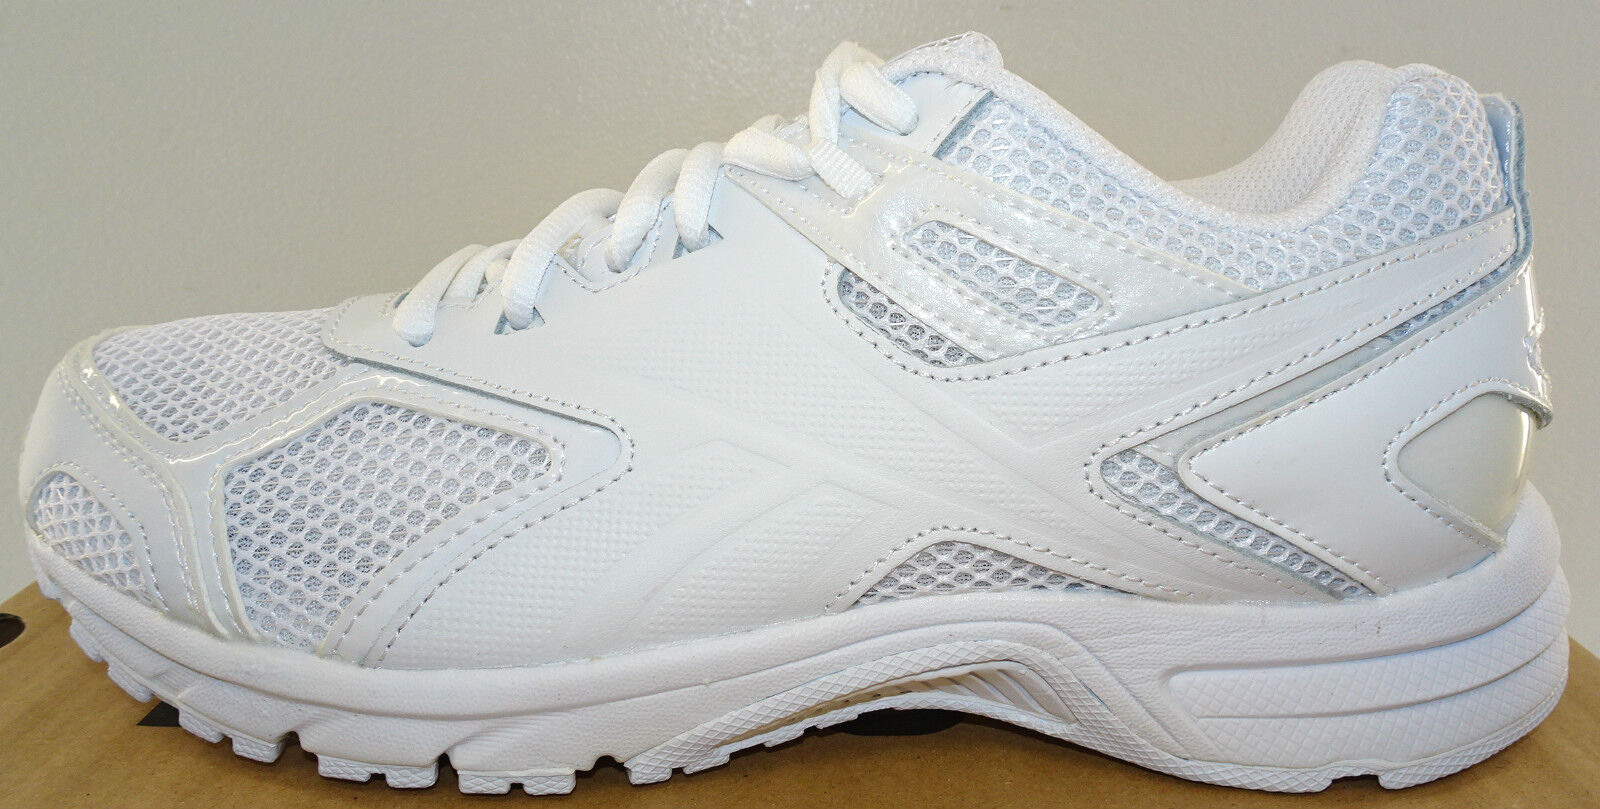 REEBOK Mens Quickchase SE CrossTrainers  Size 6.5 or 7 4E NWD $10 GREAT DEAL !!!